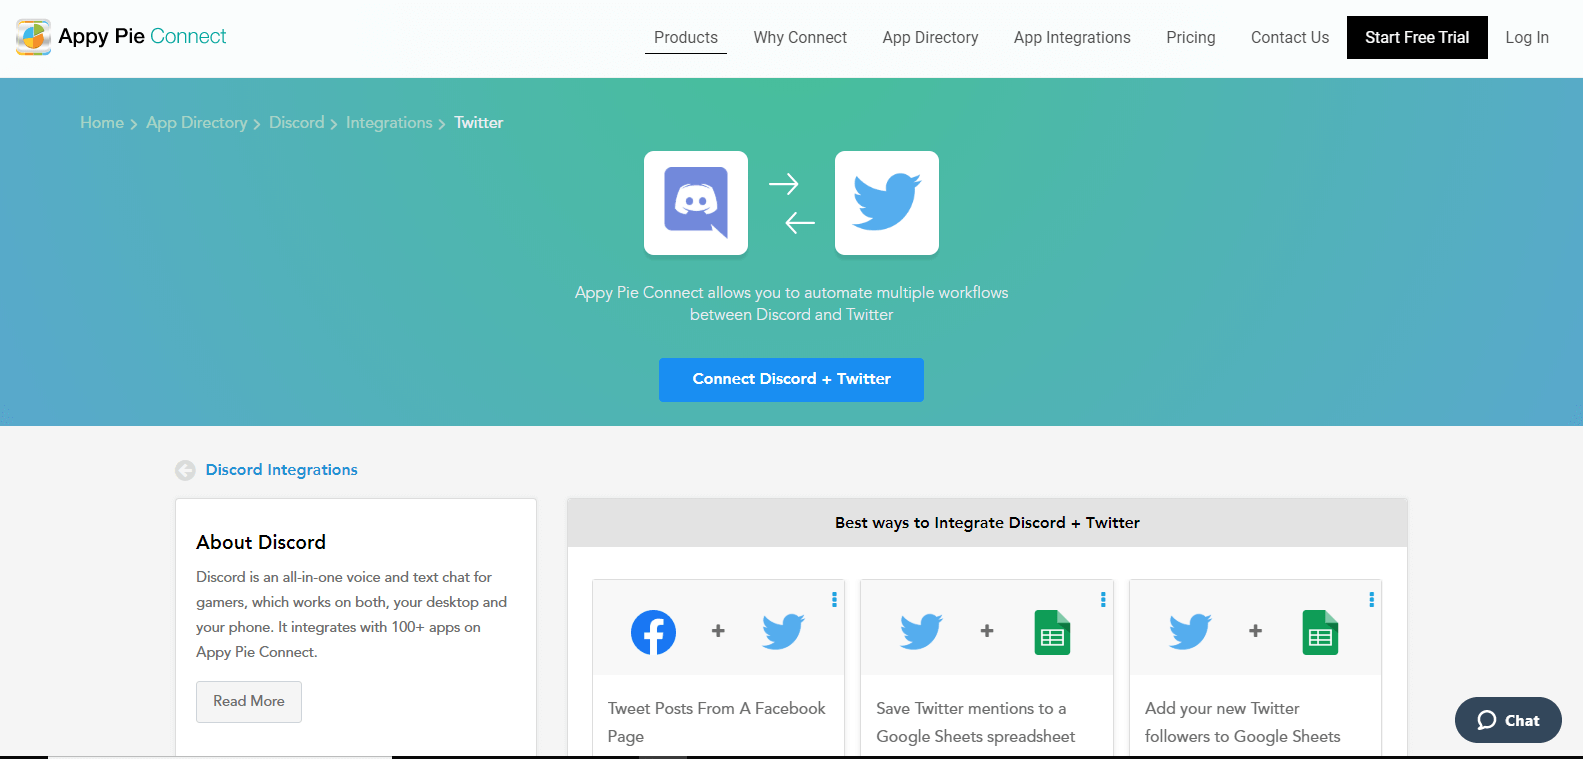 Integrated Connect discord and Twitter - Appy Pie